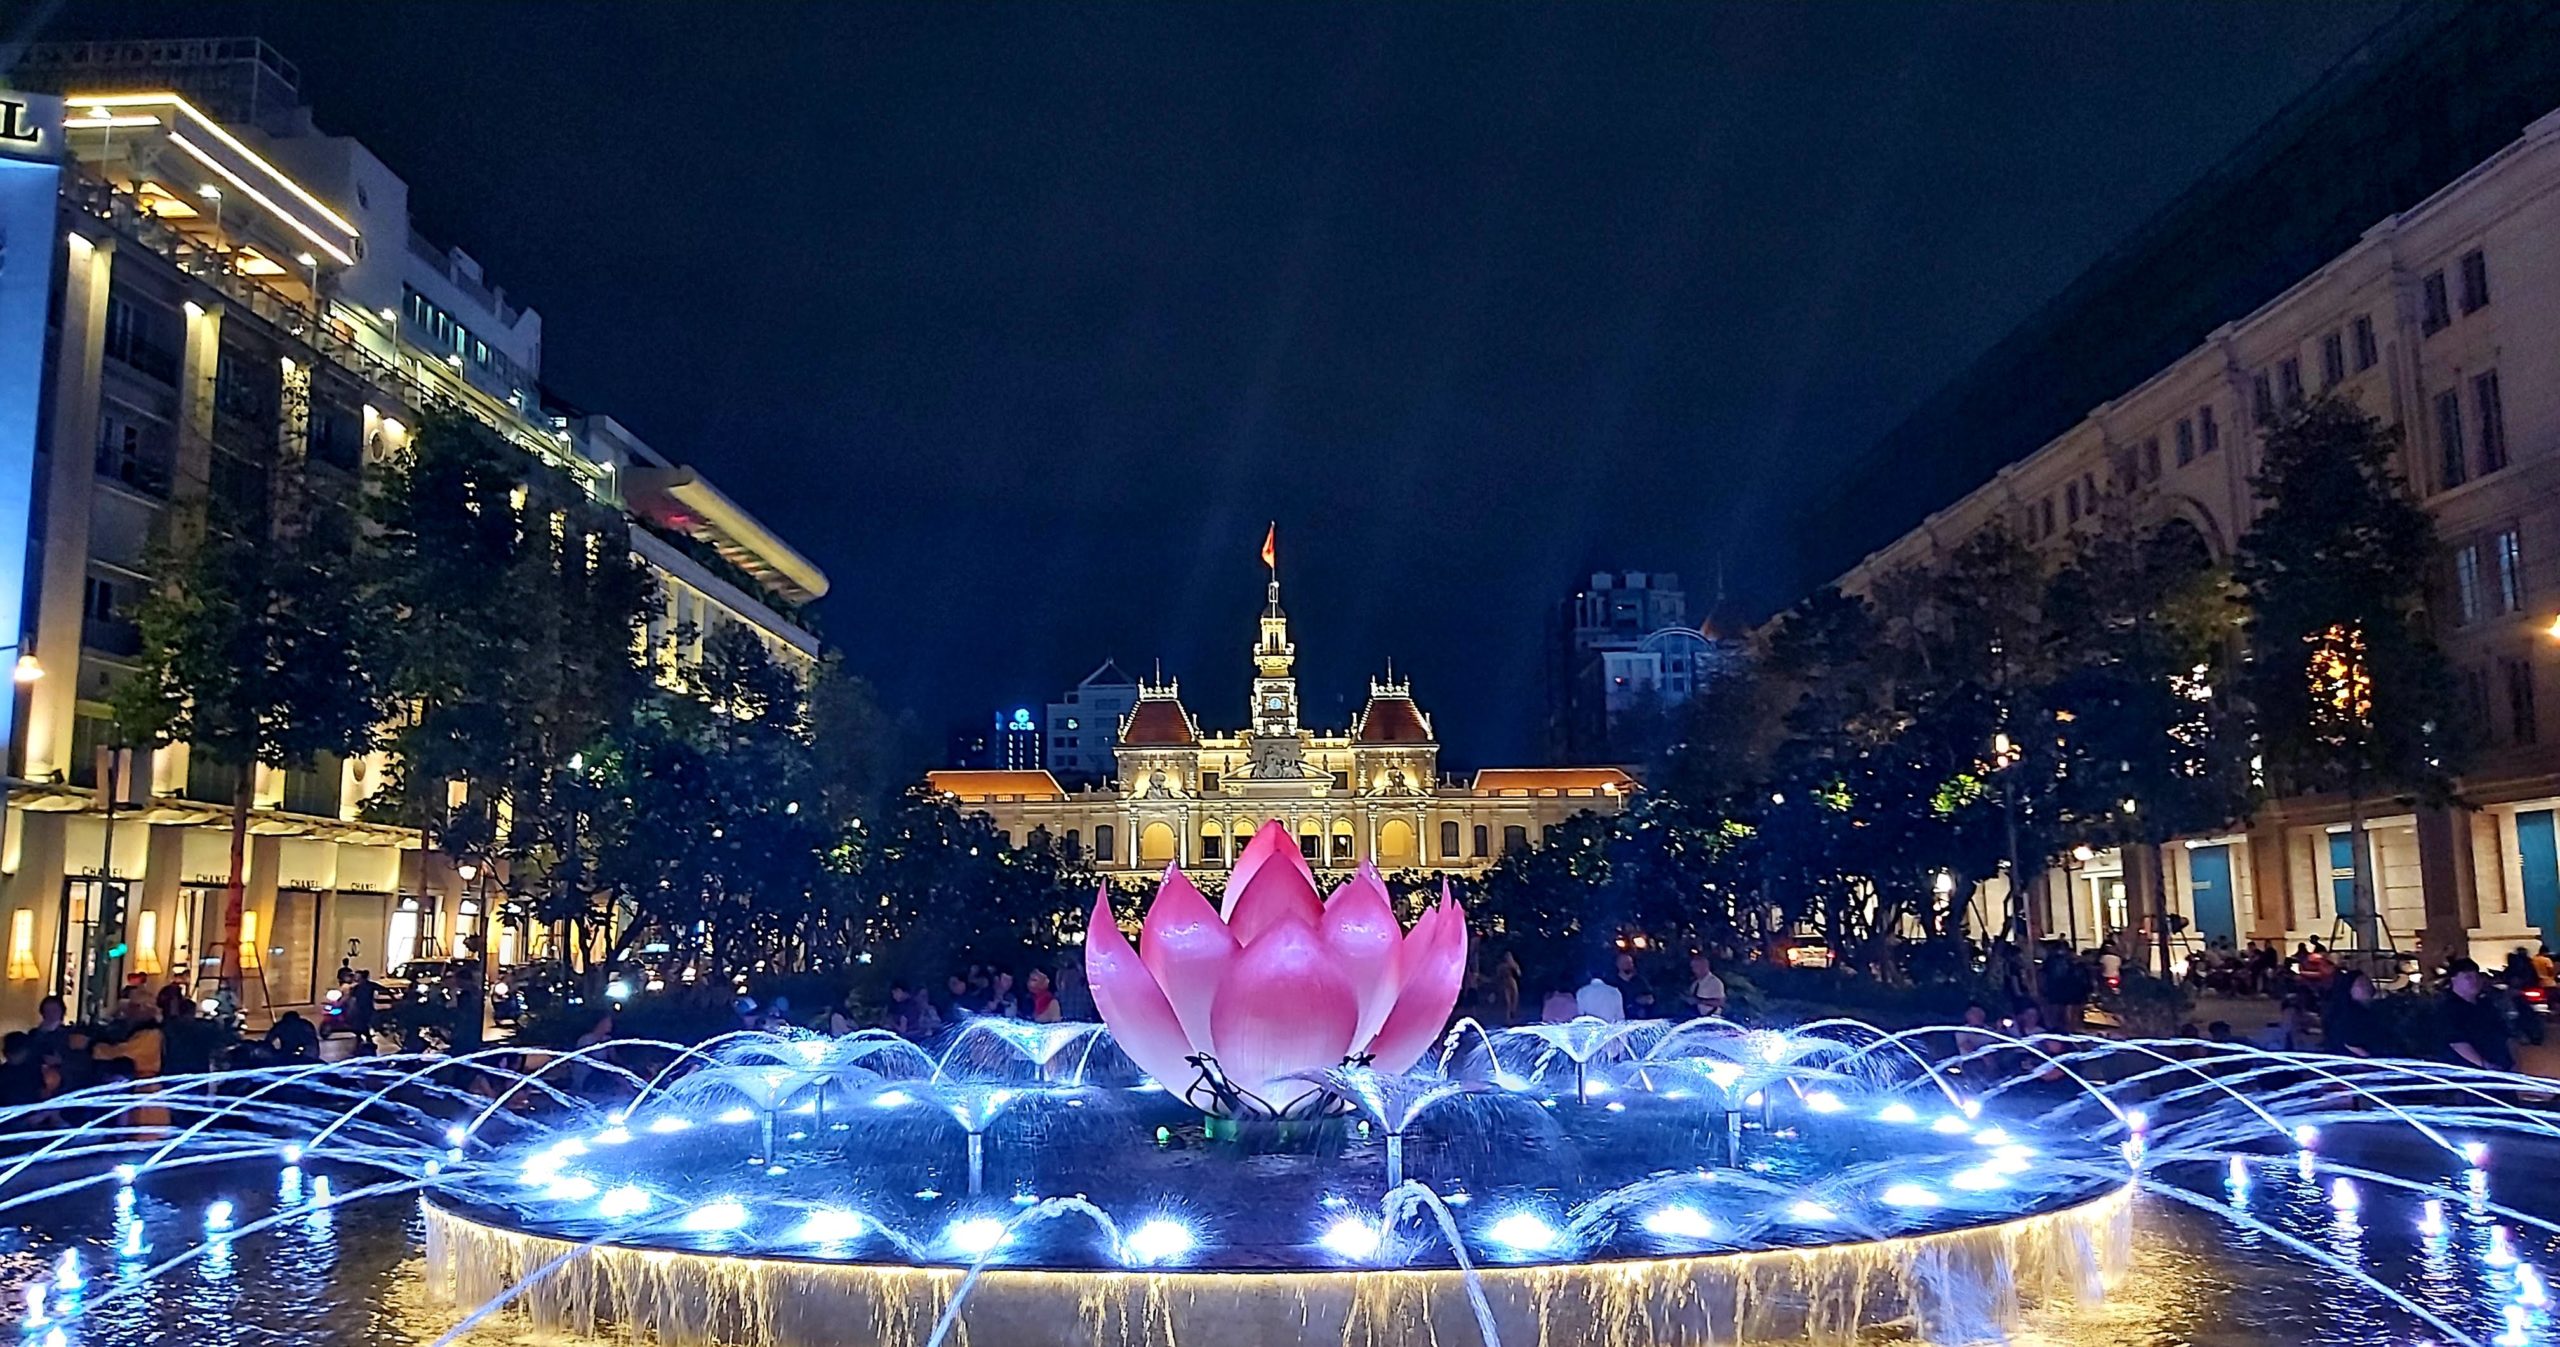 The Music fountain in Nguyen Hue Walking Stree is shaped like a lotus and stunning by night